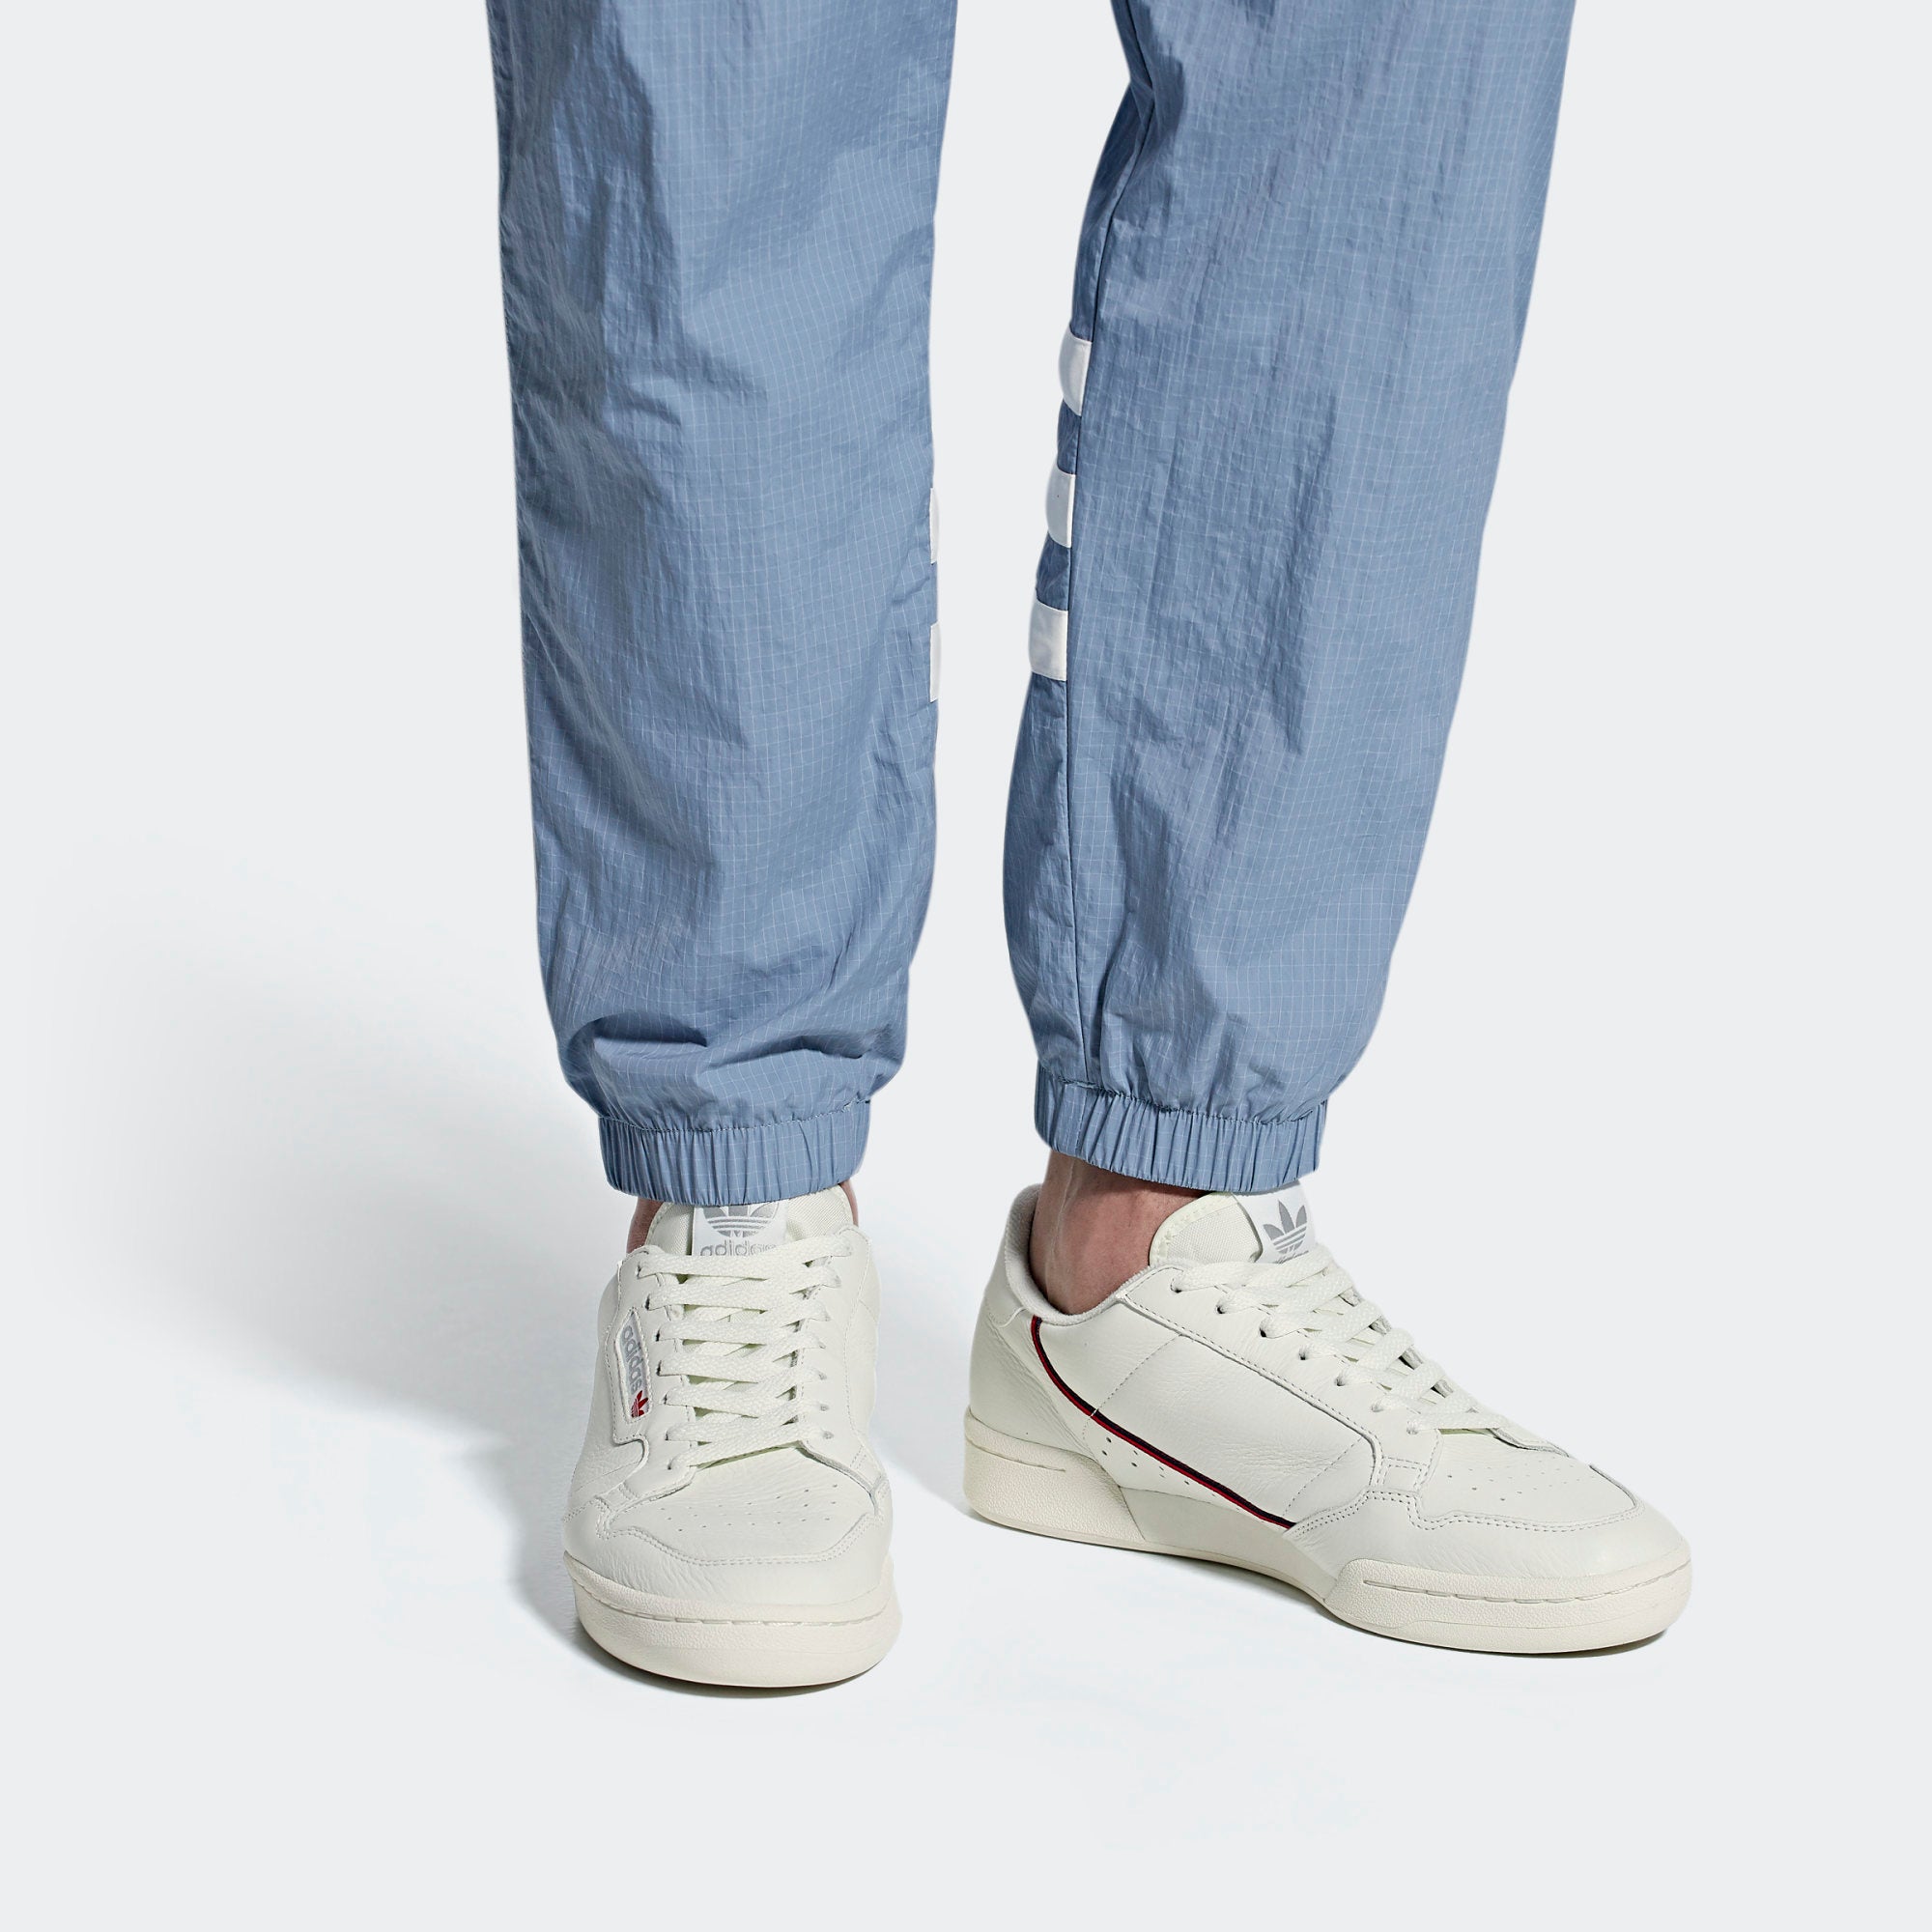 continental 80 shoes off white